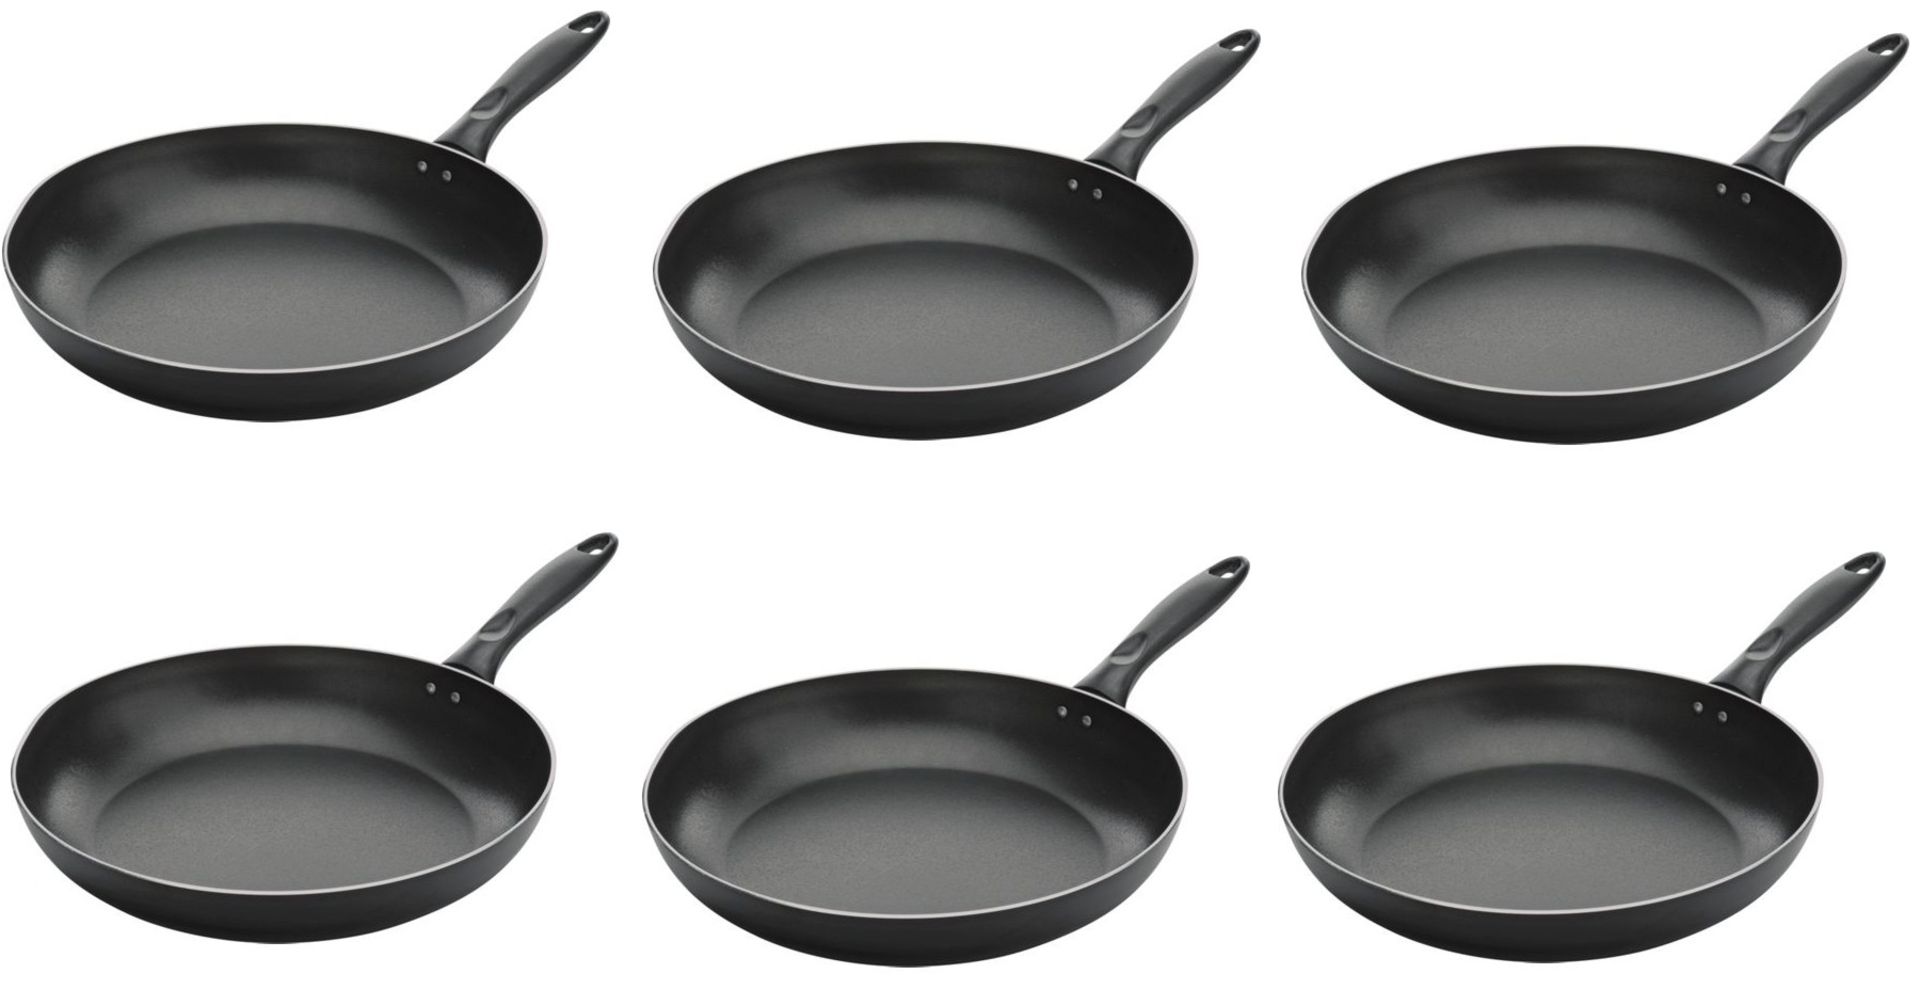 V Brand New 6 x 20cm Aluminium Non-Stick Teflon coated Frying Pan With Stainless Steel And Stay Cool